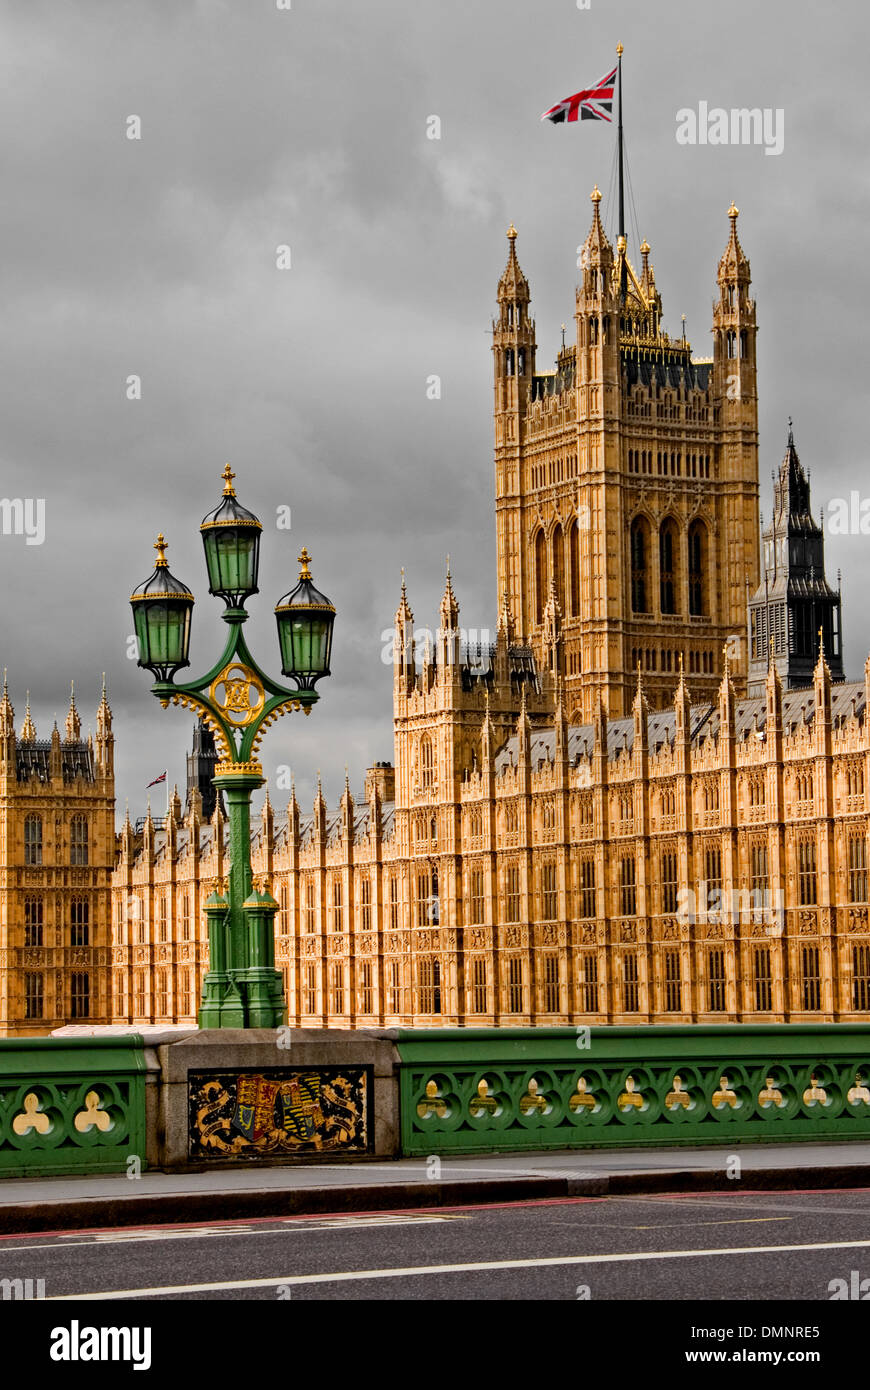 Big Ben, The Palace of Westminster and River Thames are iconic destinations in the heart of London. Stock Photo